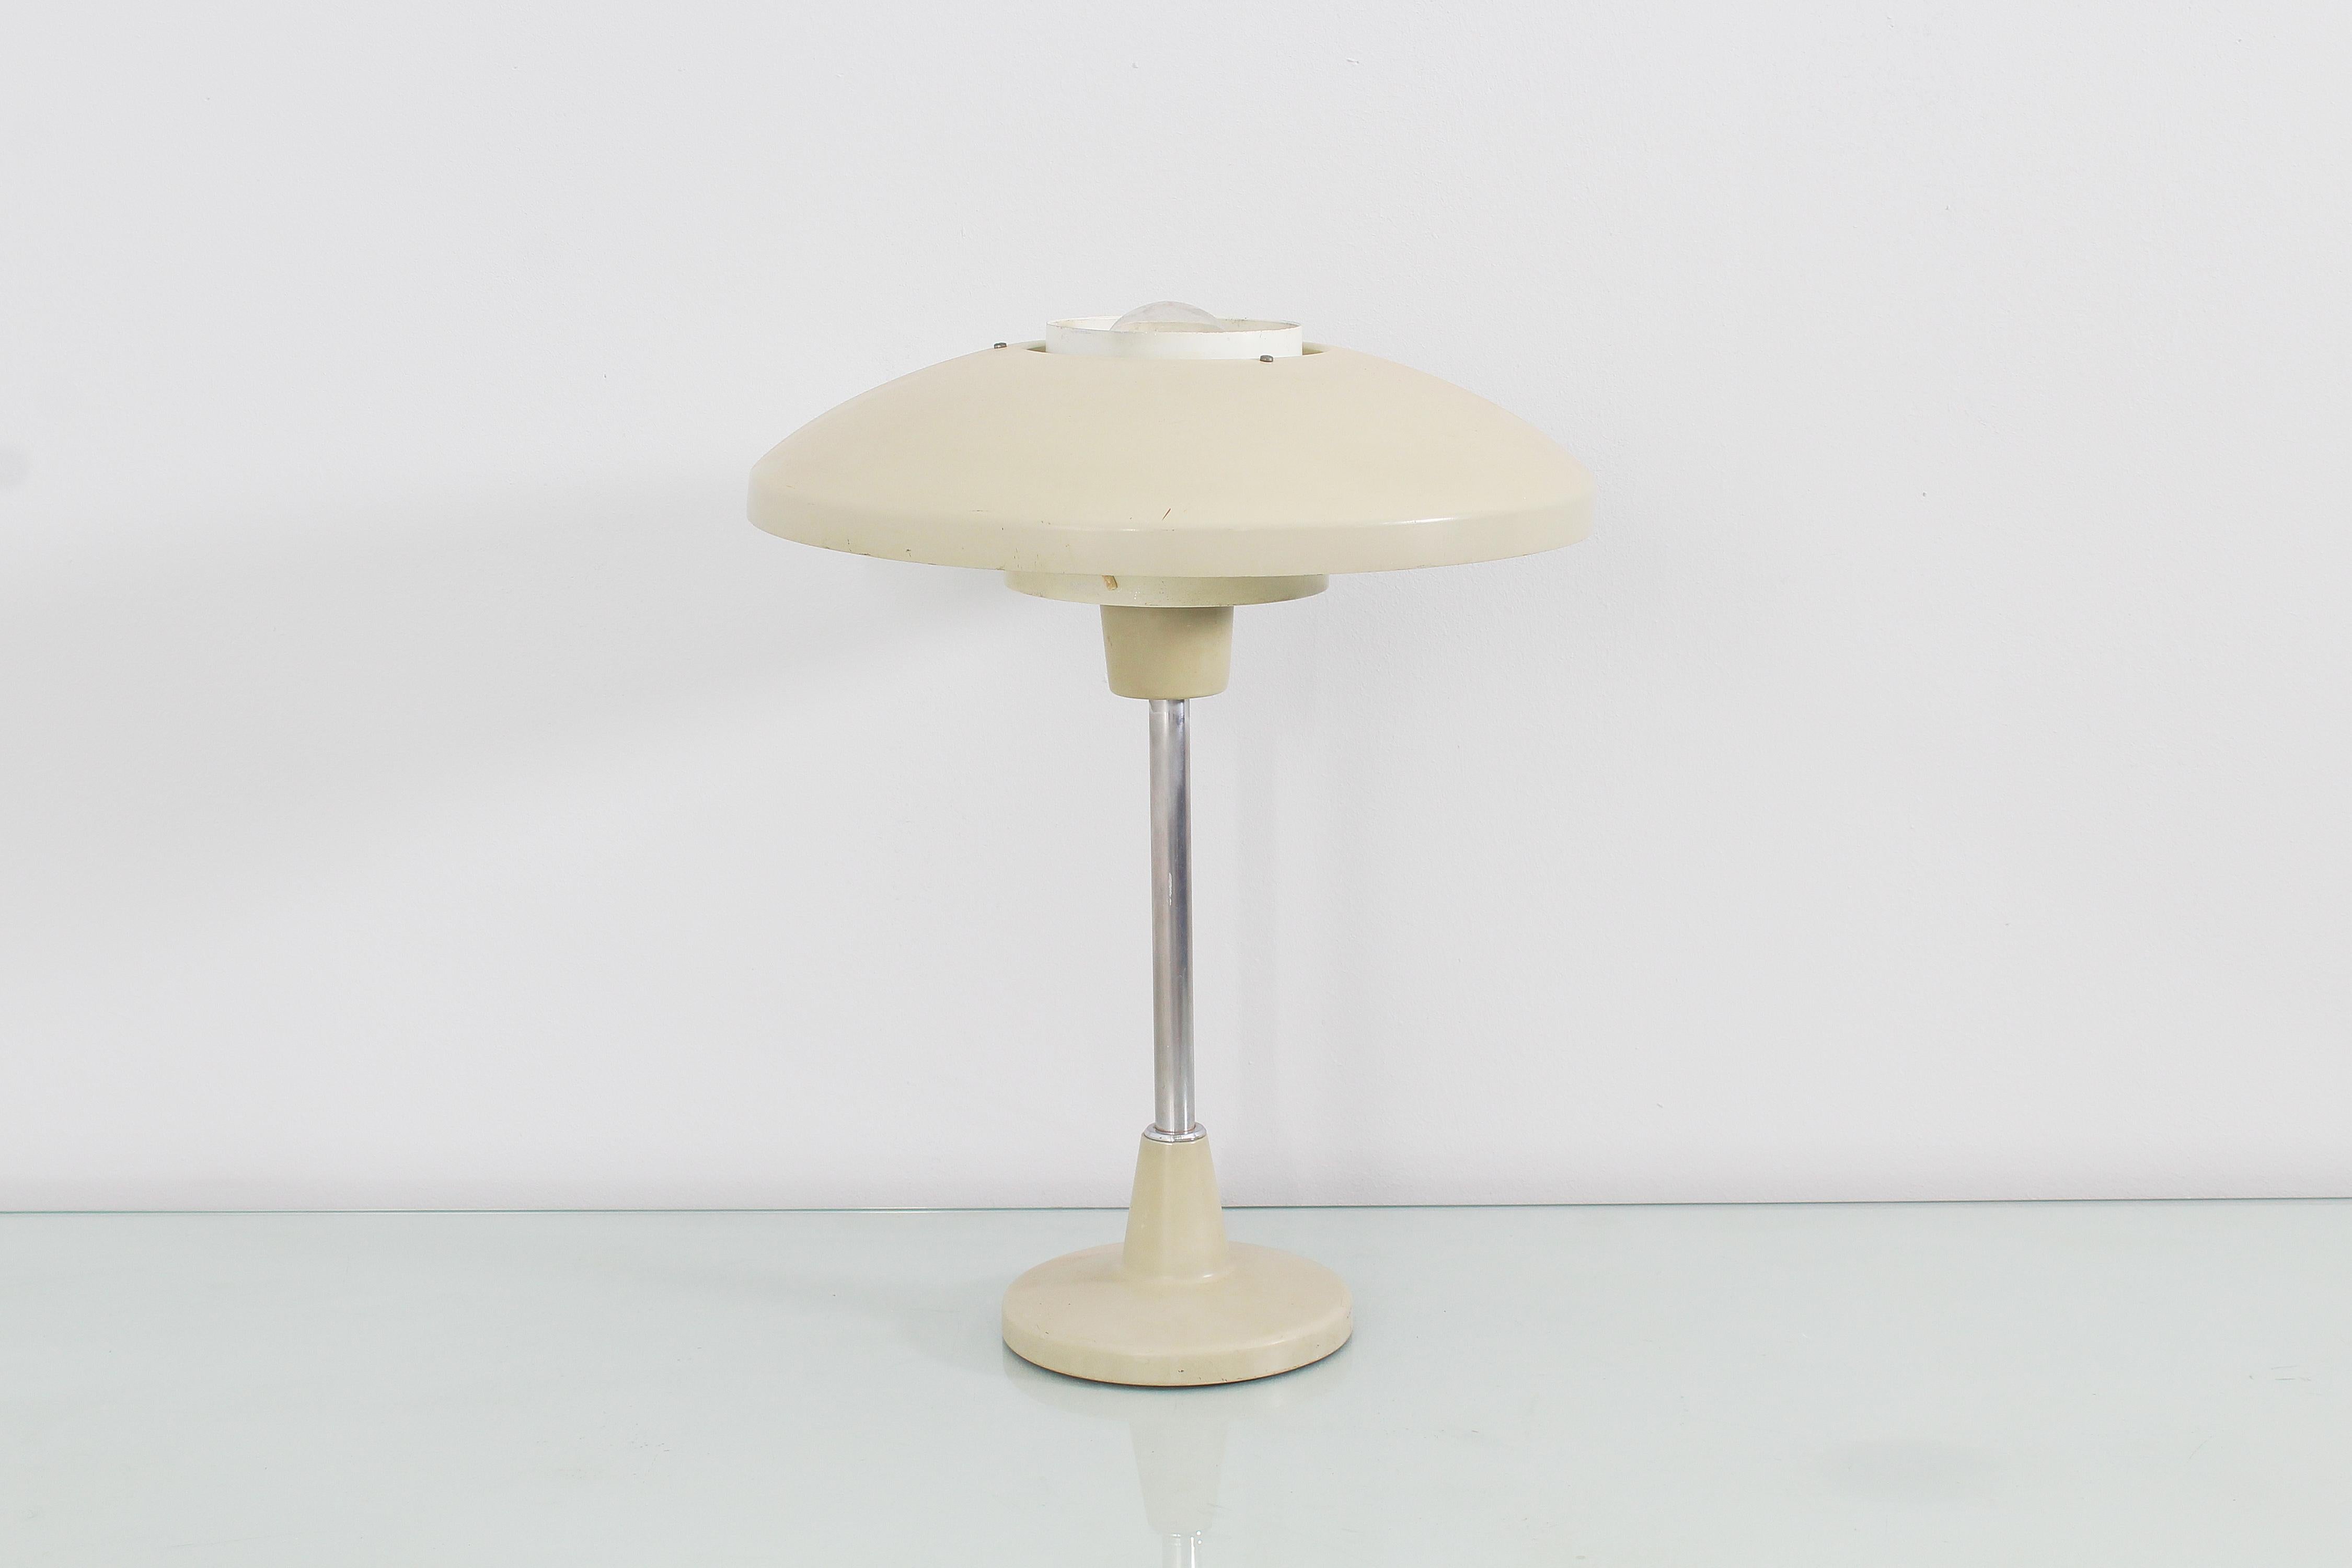 Beautiful table lamp produced by Stilnovo, model 